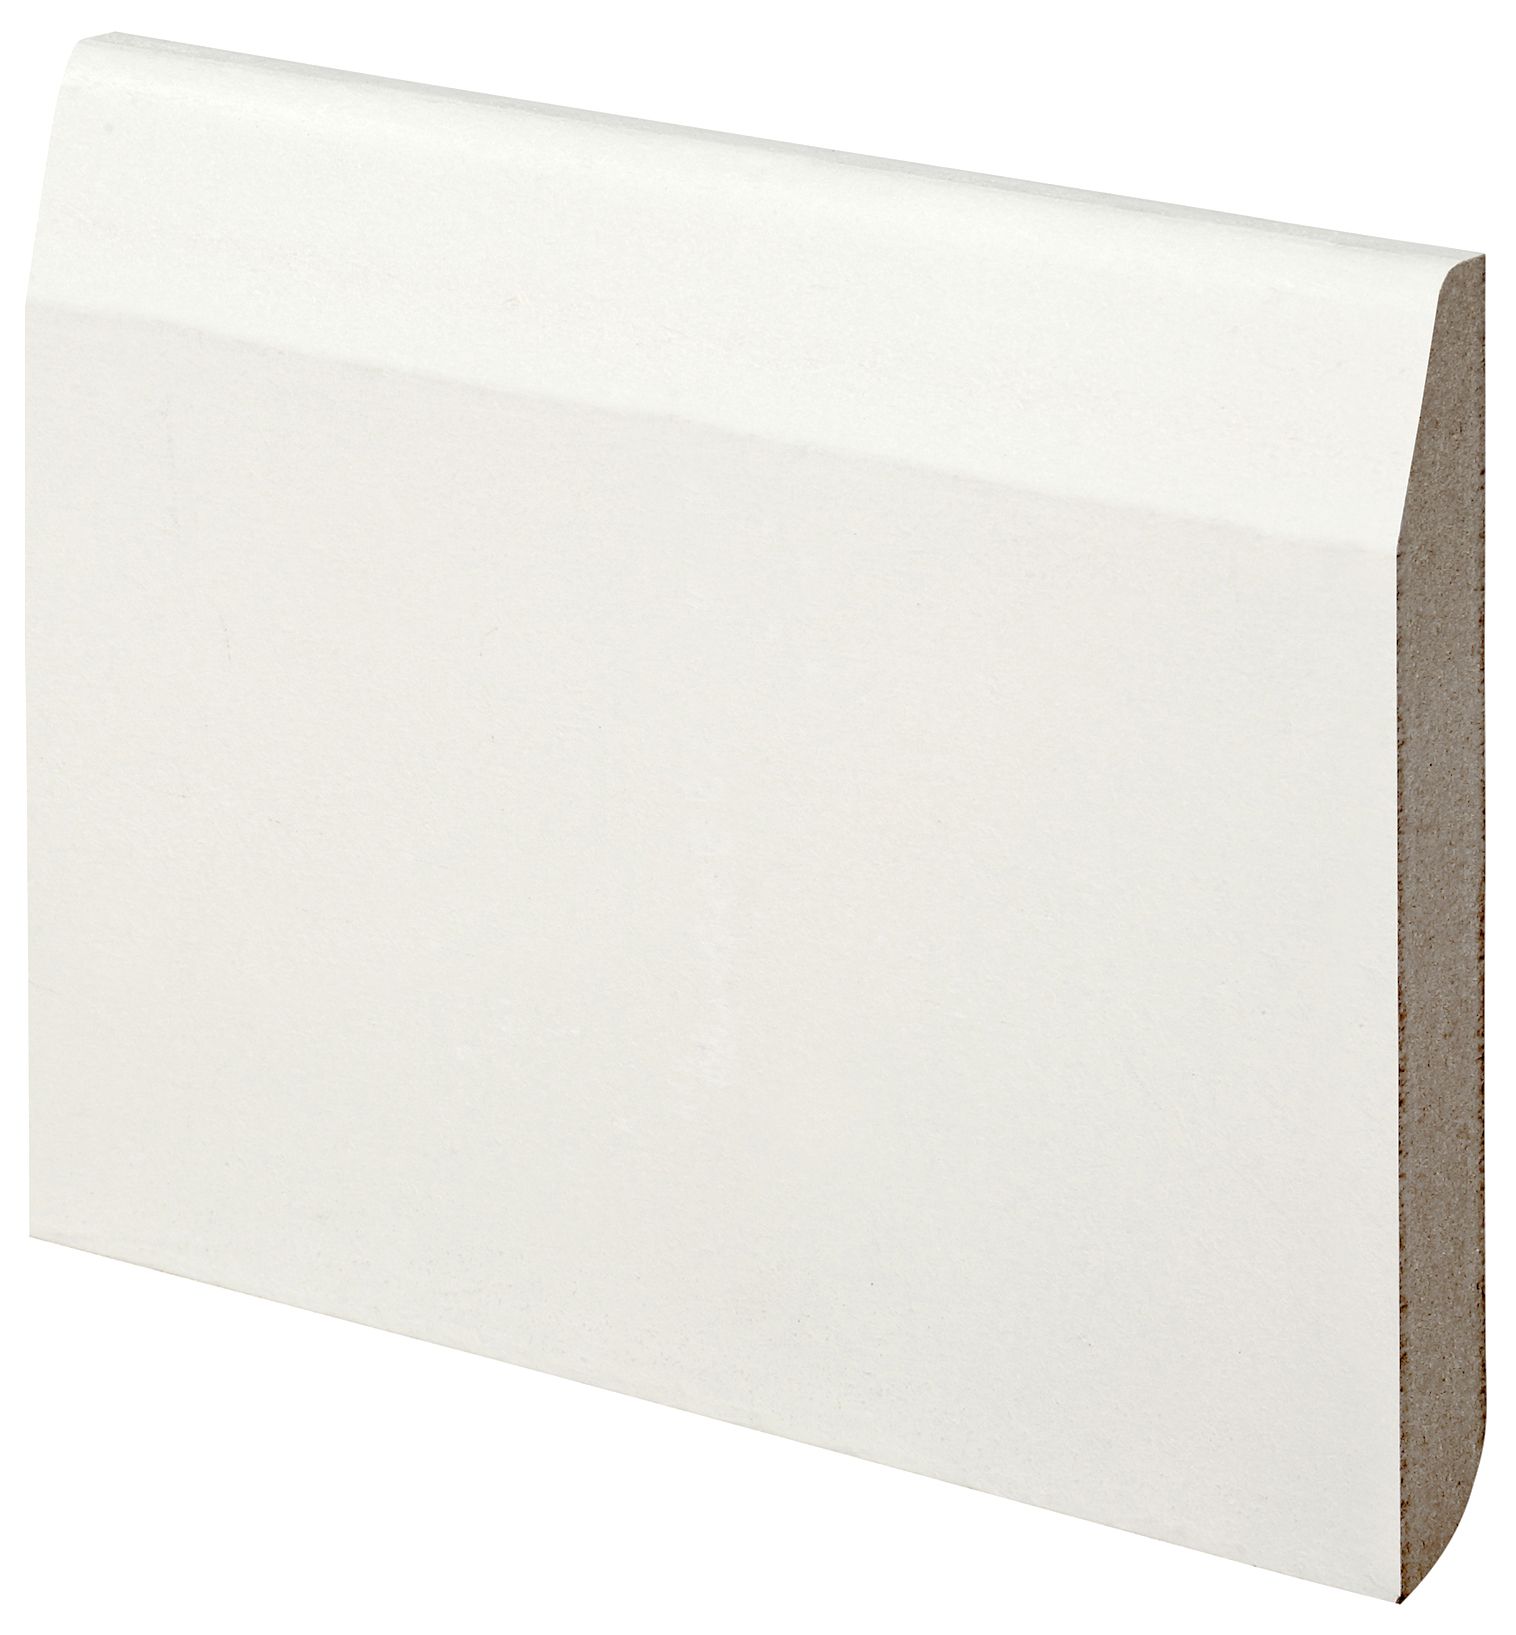 Image of Wickes Dual Purpose Chamfered/Bullnose Primed MDF Skirting - 18 x 119 x 2400mm - Pack of 4